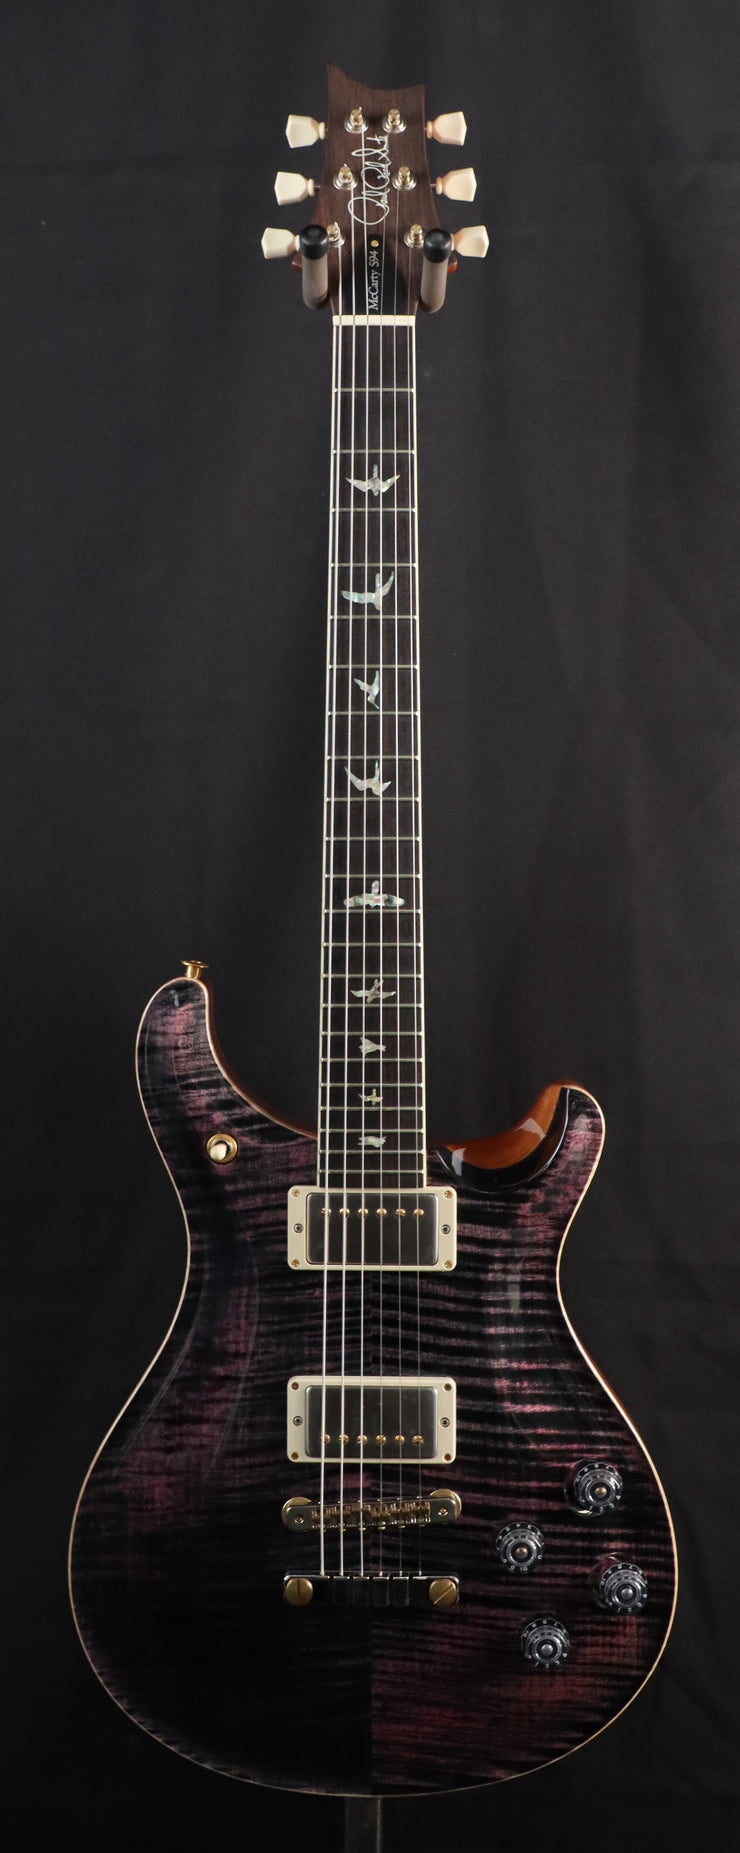 NEW - PRS McCarty 594 "10 Top"